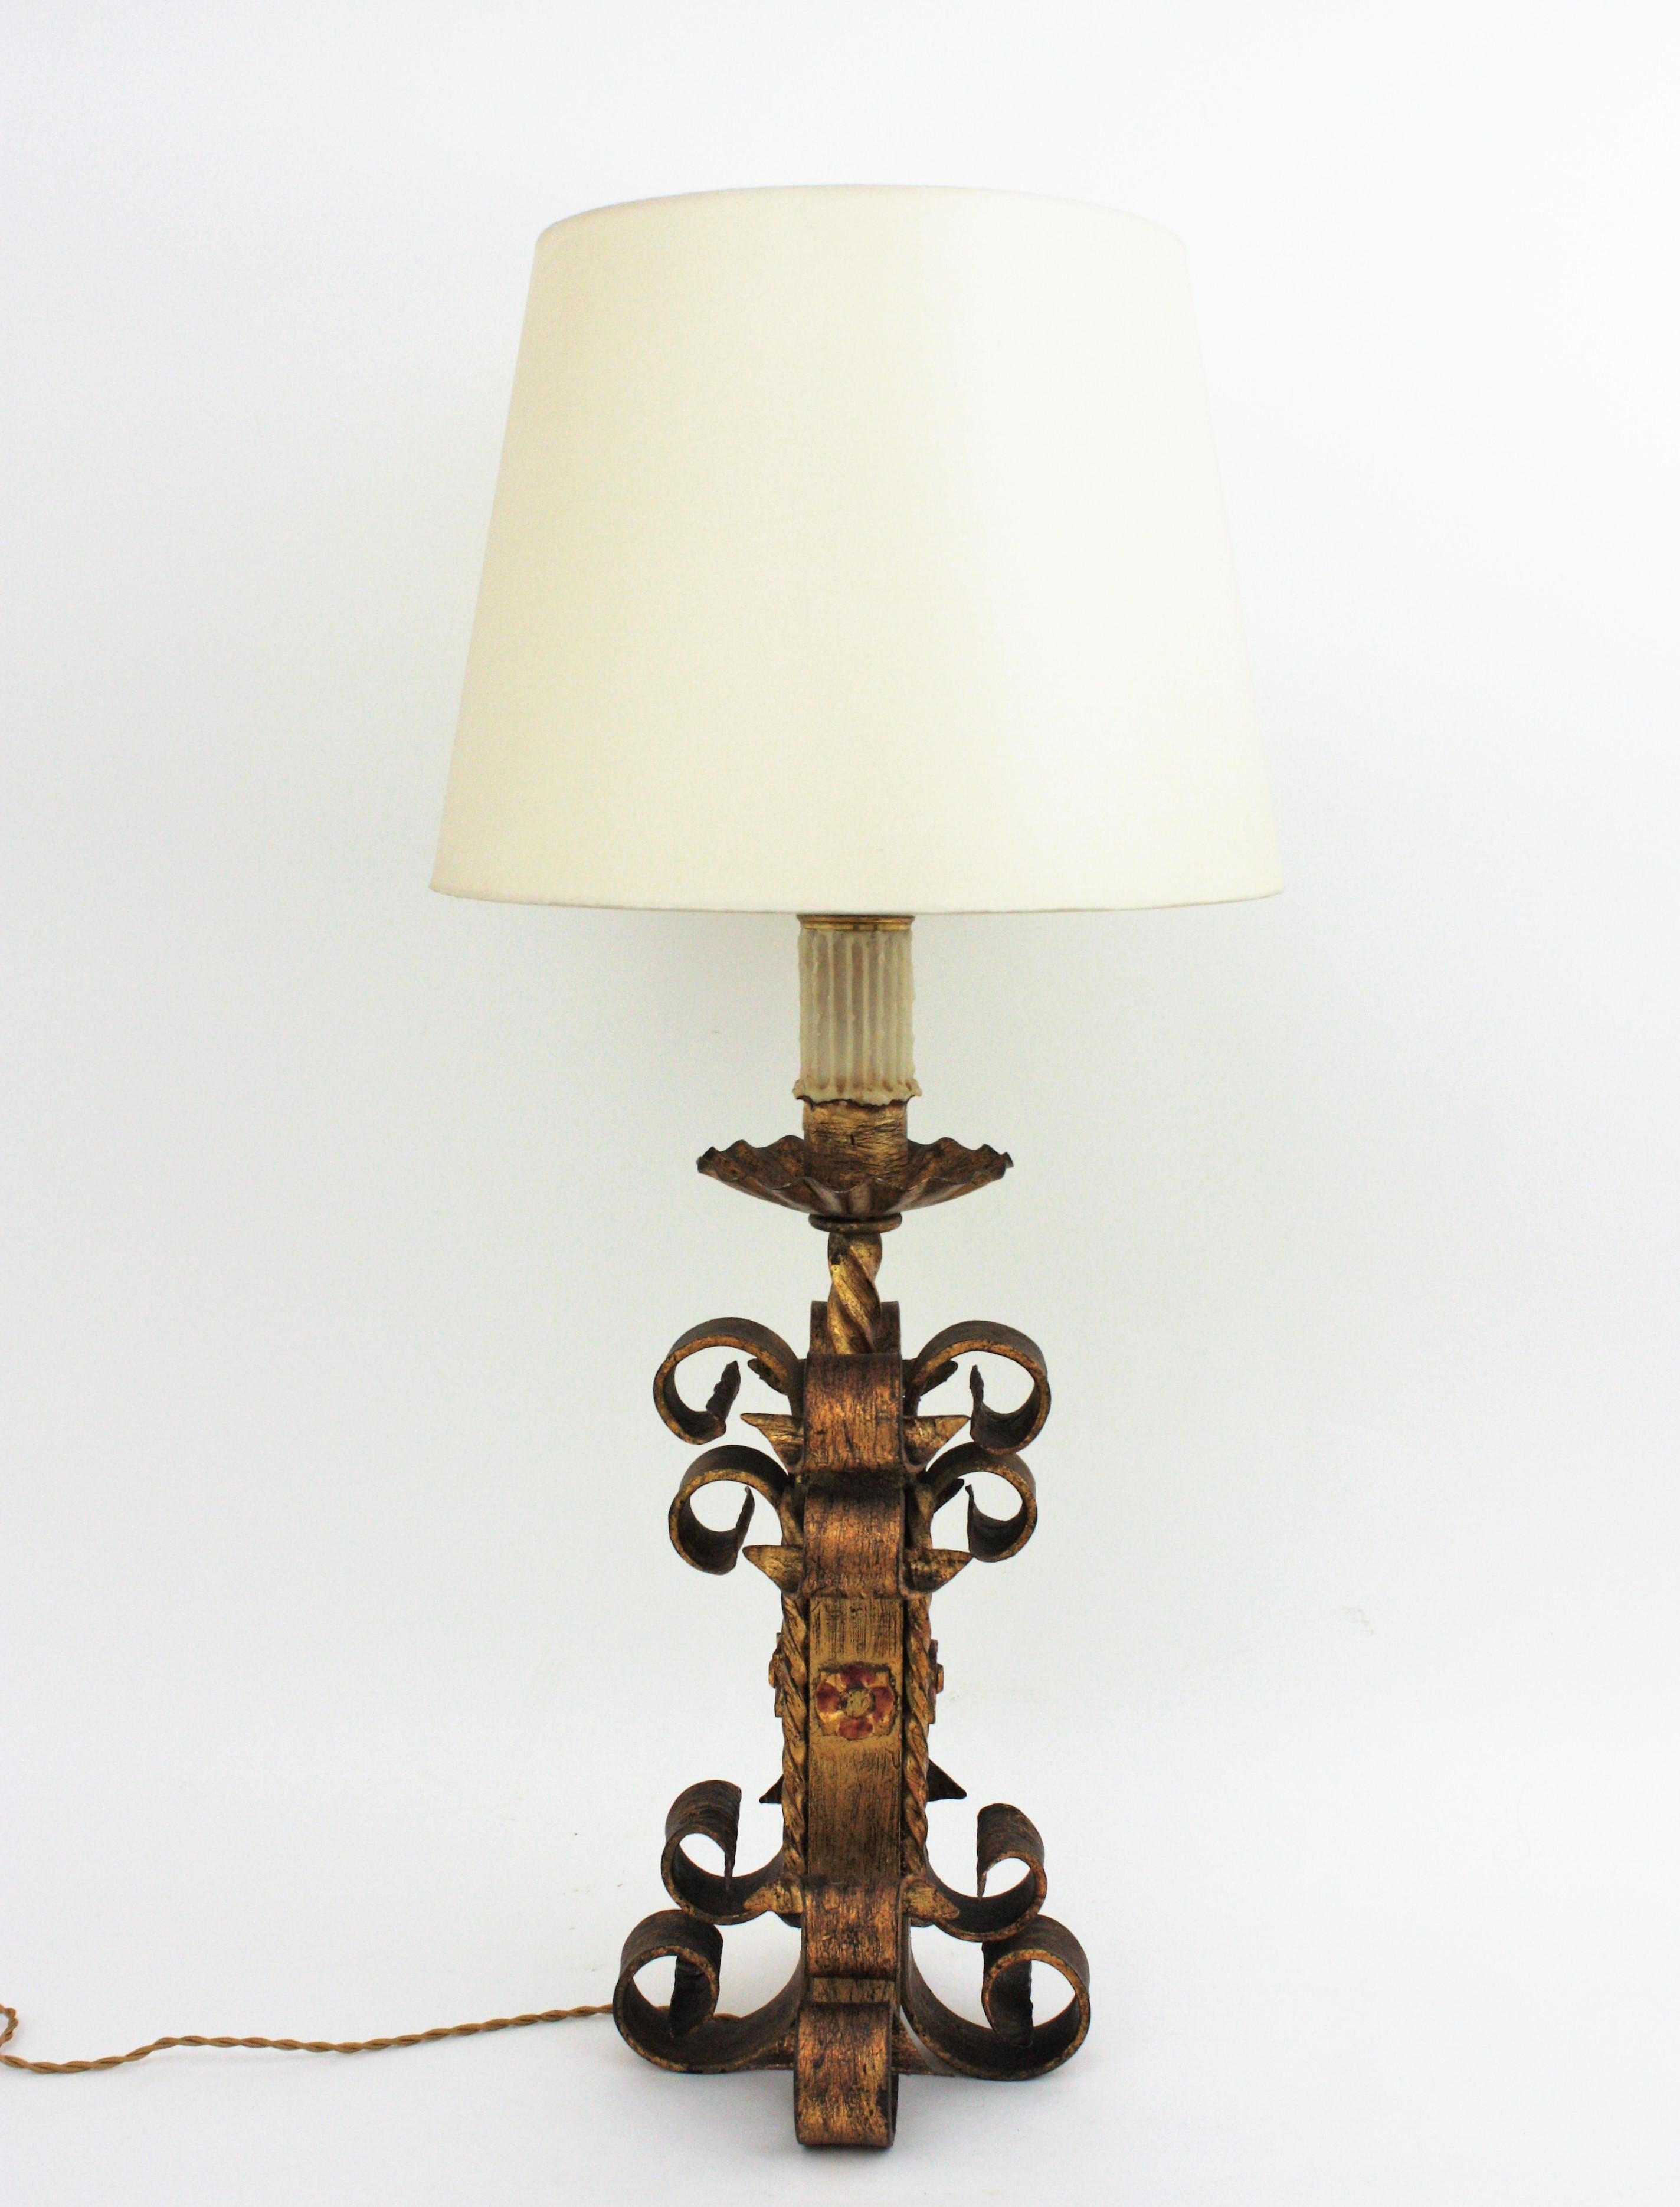 Spanish Colonial Spanish Revival Scrollwork Table Lamp in Gilt Wrought Iron, 1940s For Sale